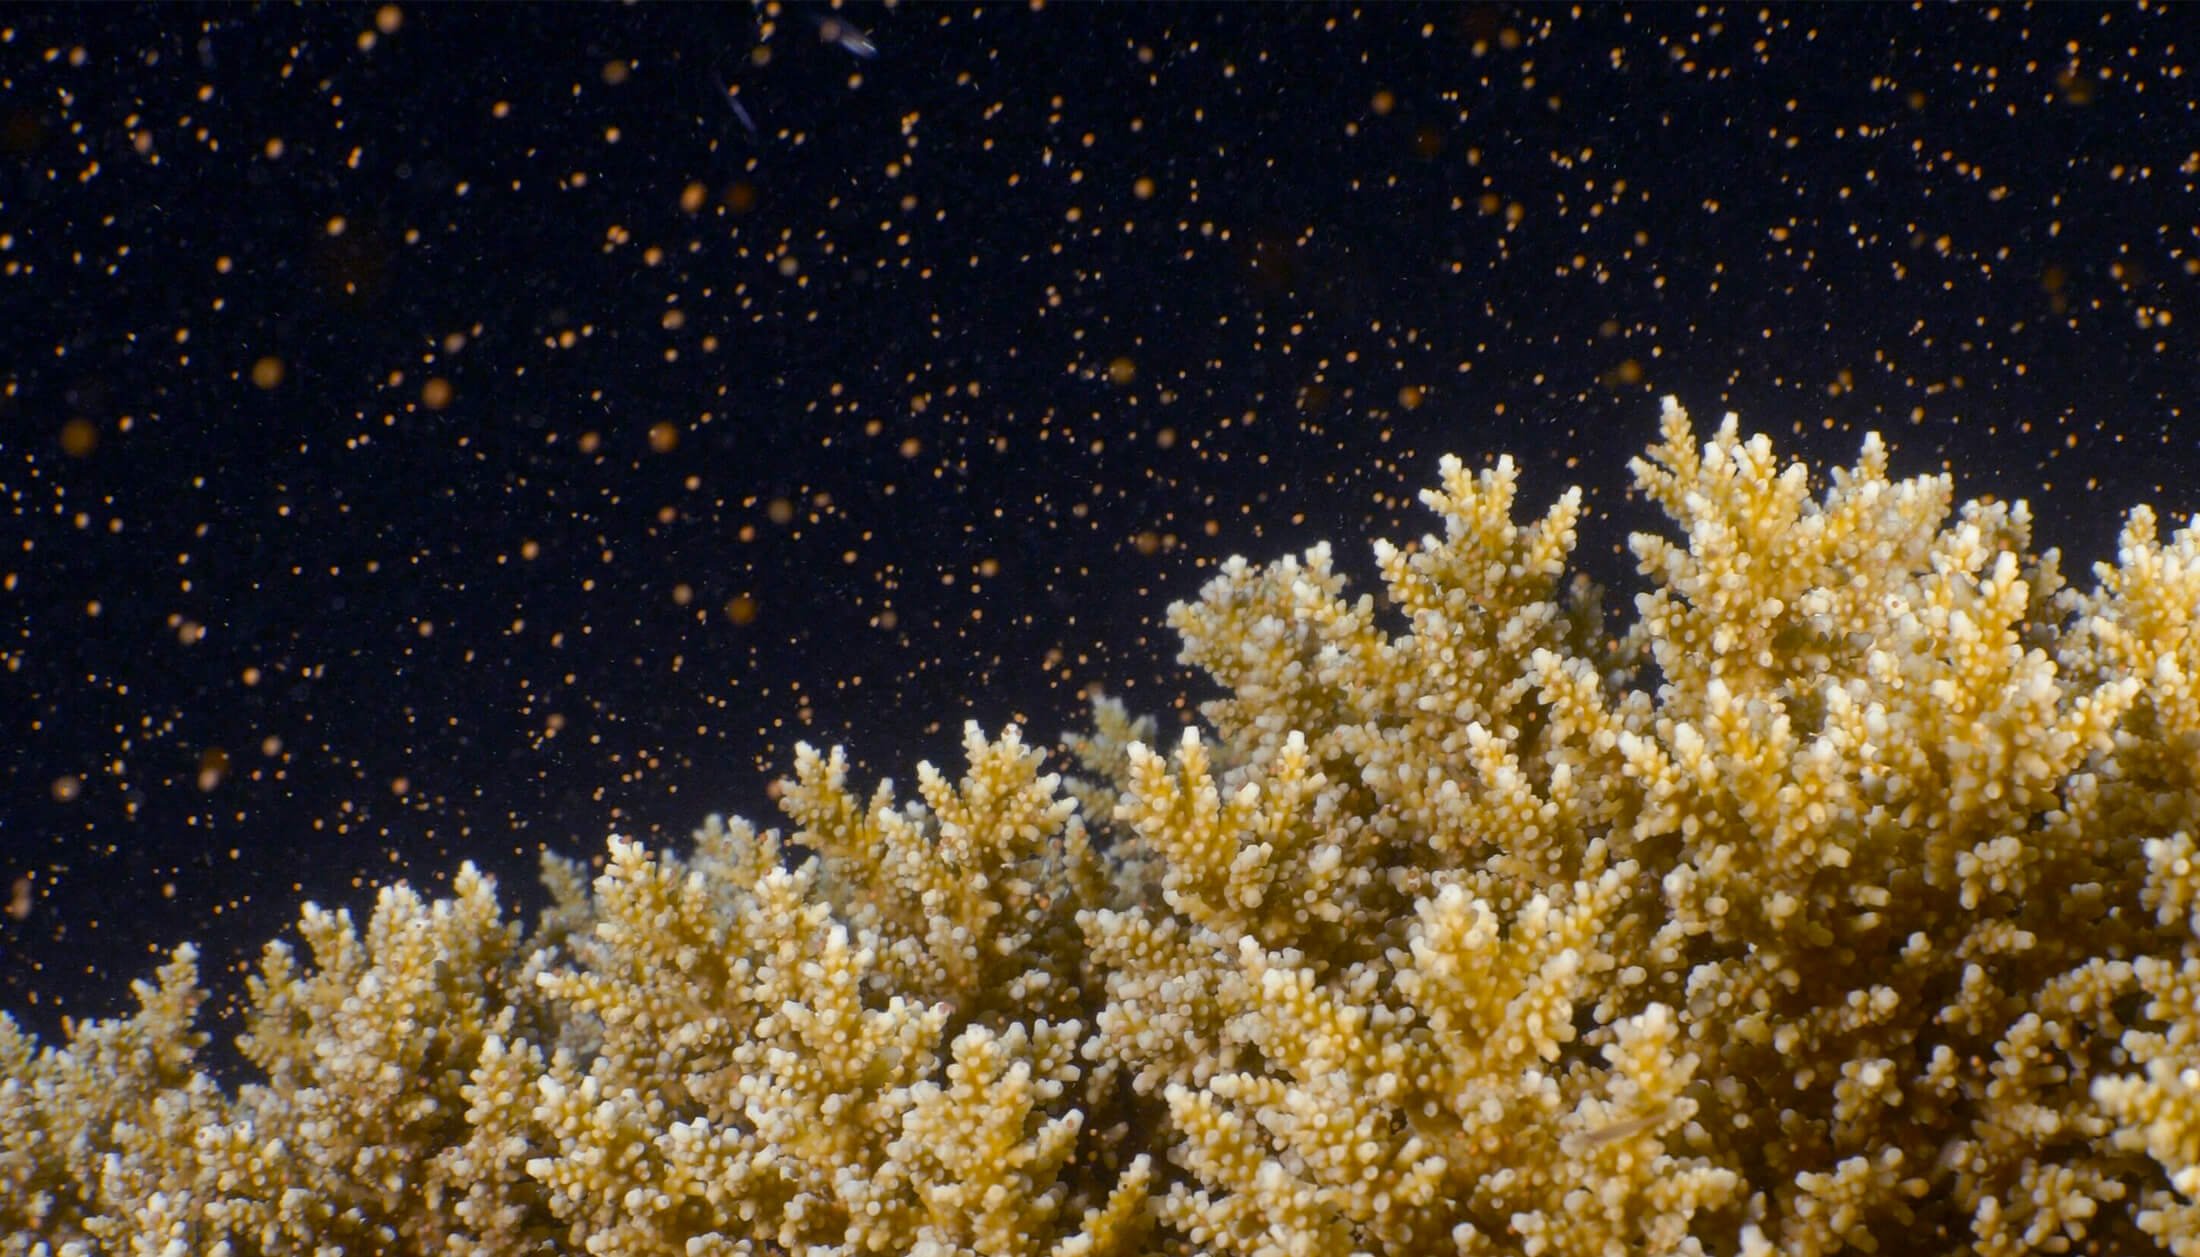 Coral spawning close-up